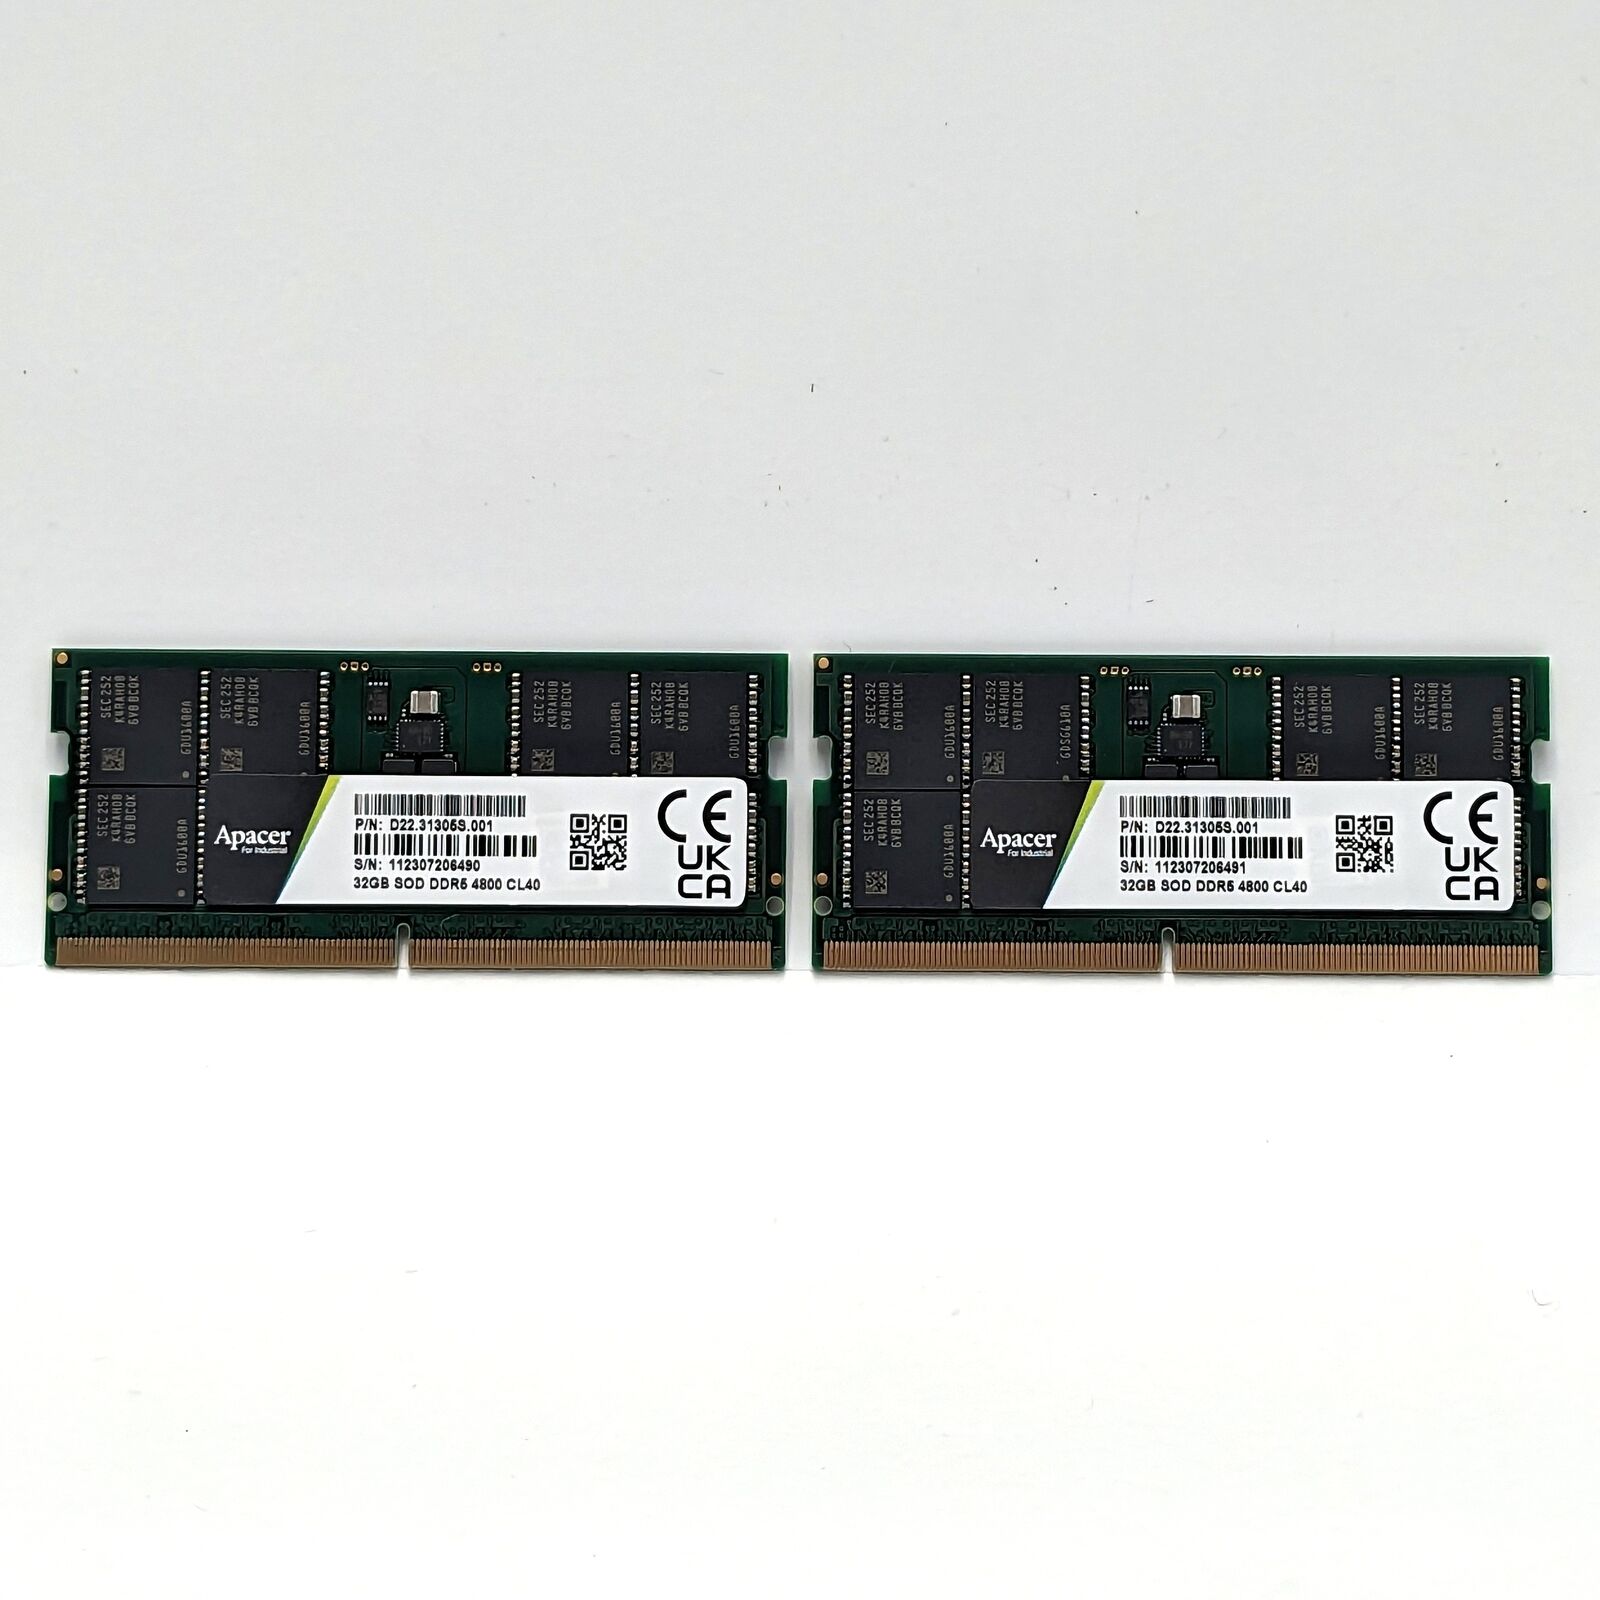 Apacer D22.31305S.001 64GB (32GB x 2) DDR5 4800MHz SODIMM Memory (2-Pack)